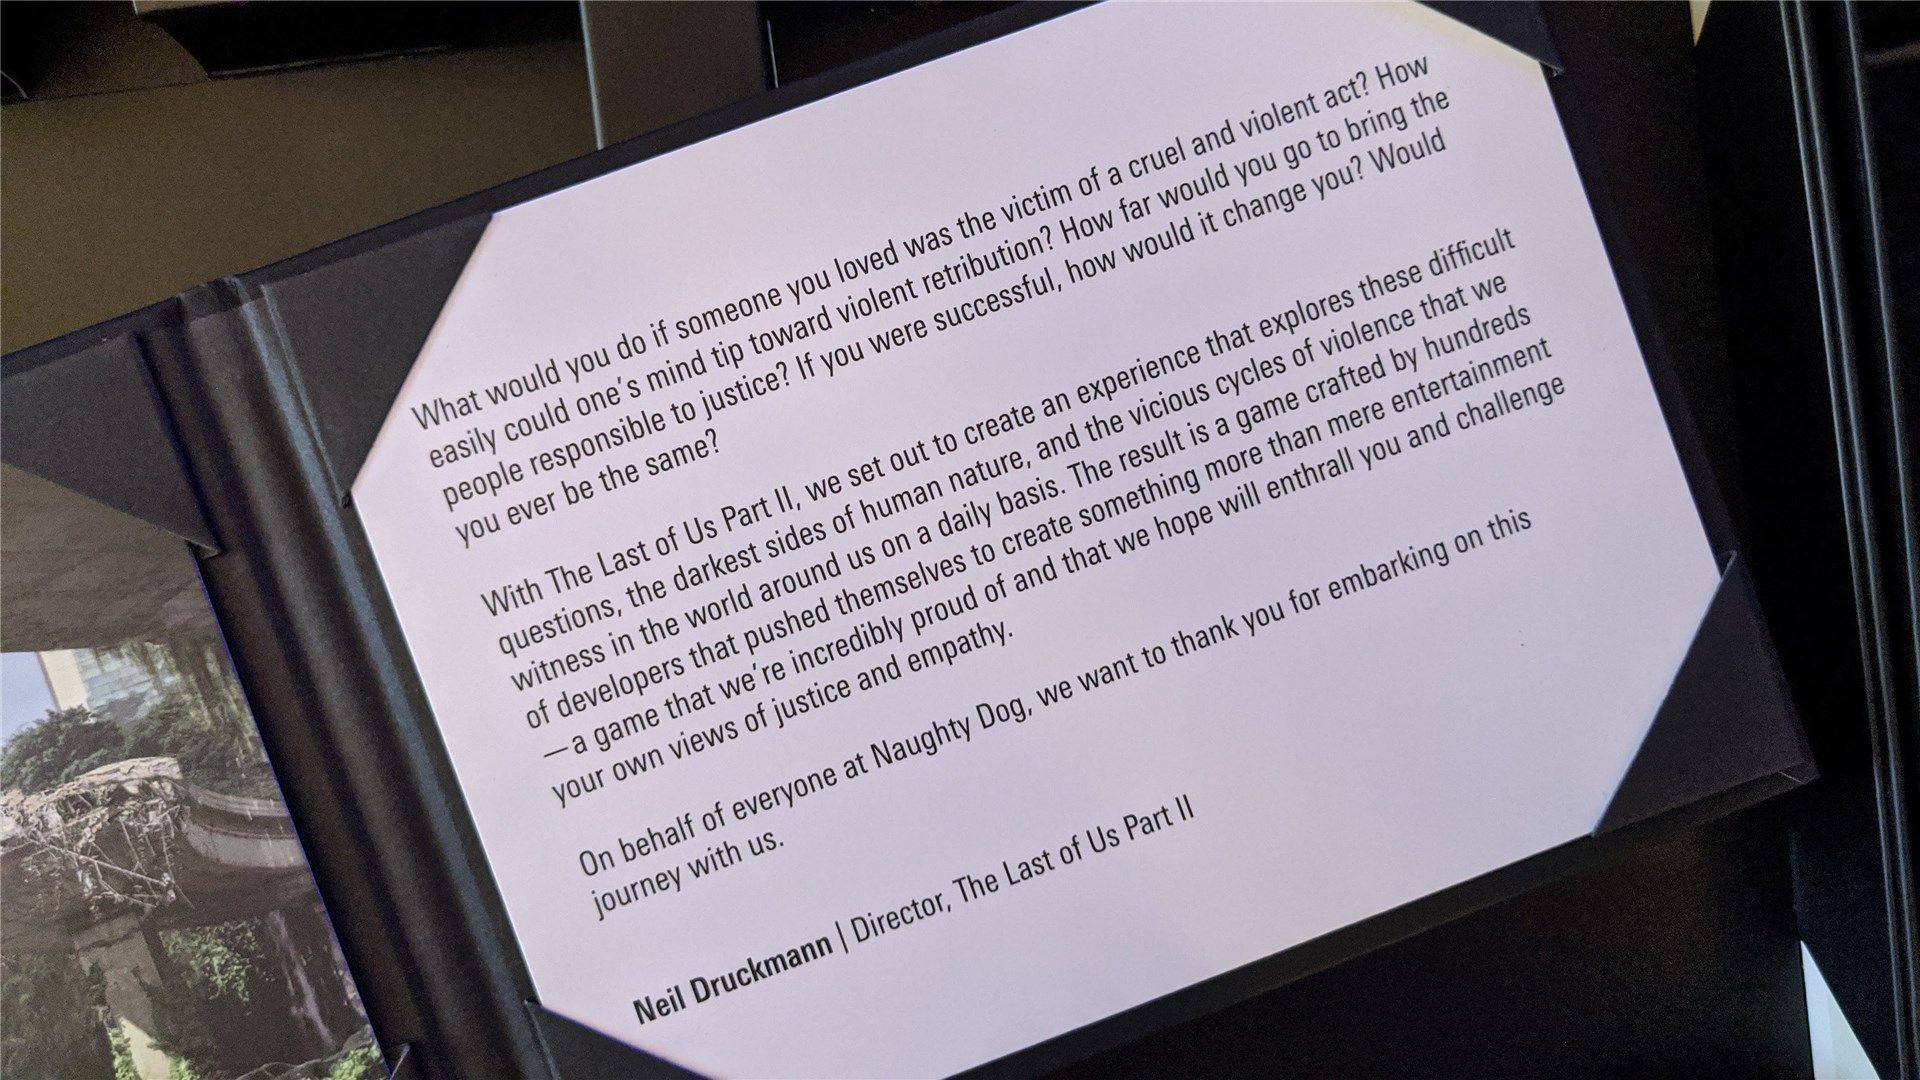 A close-up of the thank you letter, written by Naughty Dog director Neil Druckman